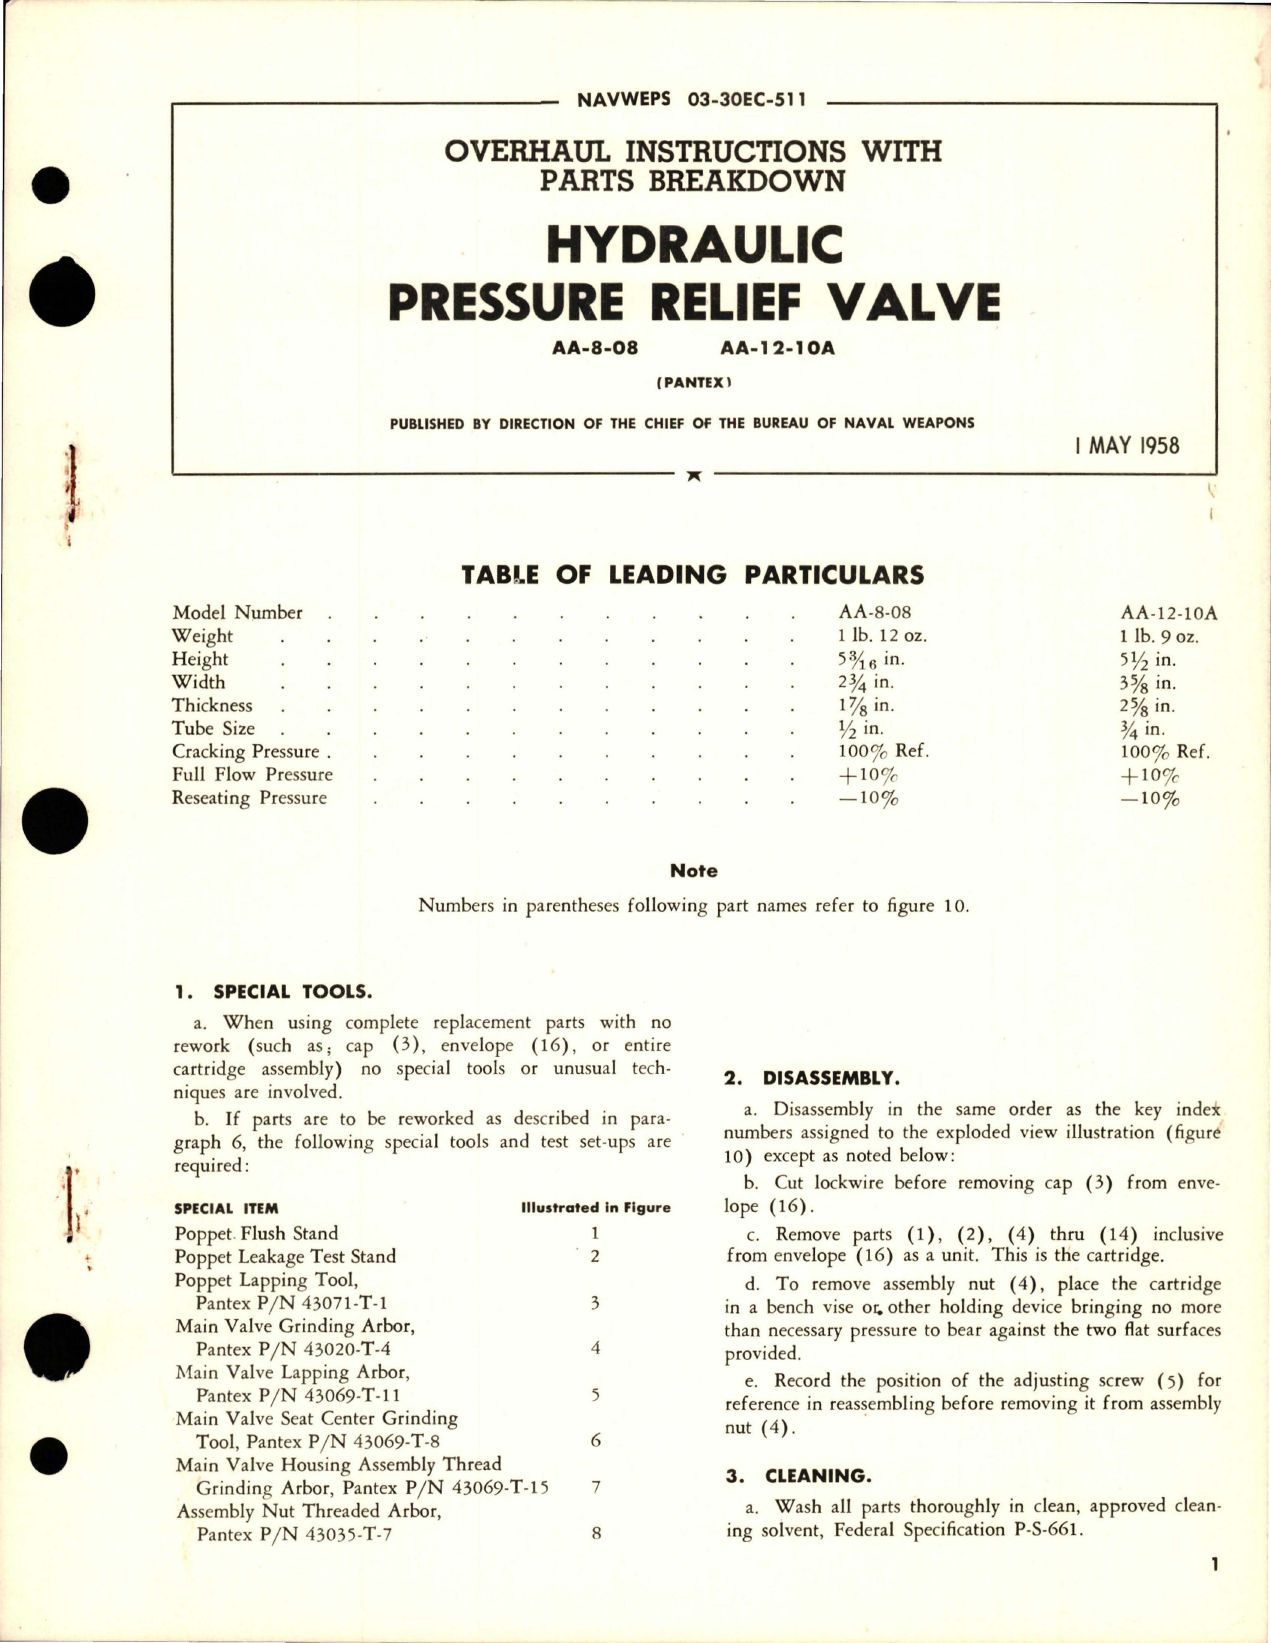 Sample page 1 from AirCorps Library document: Overhaul Instructions with Parts Breakdown for Hydraulic Pressure Relief Valve - AA-8-08 and AA-12-10A